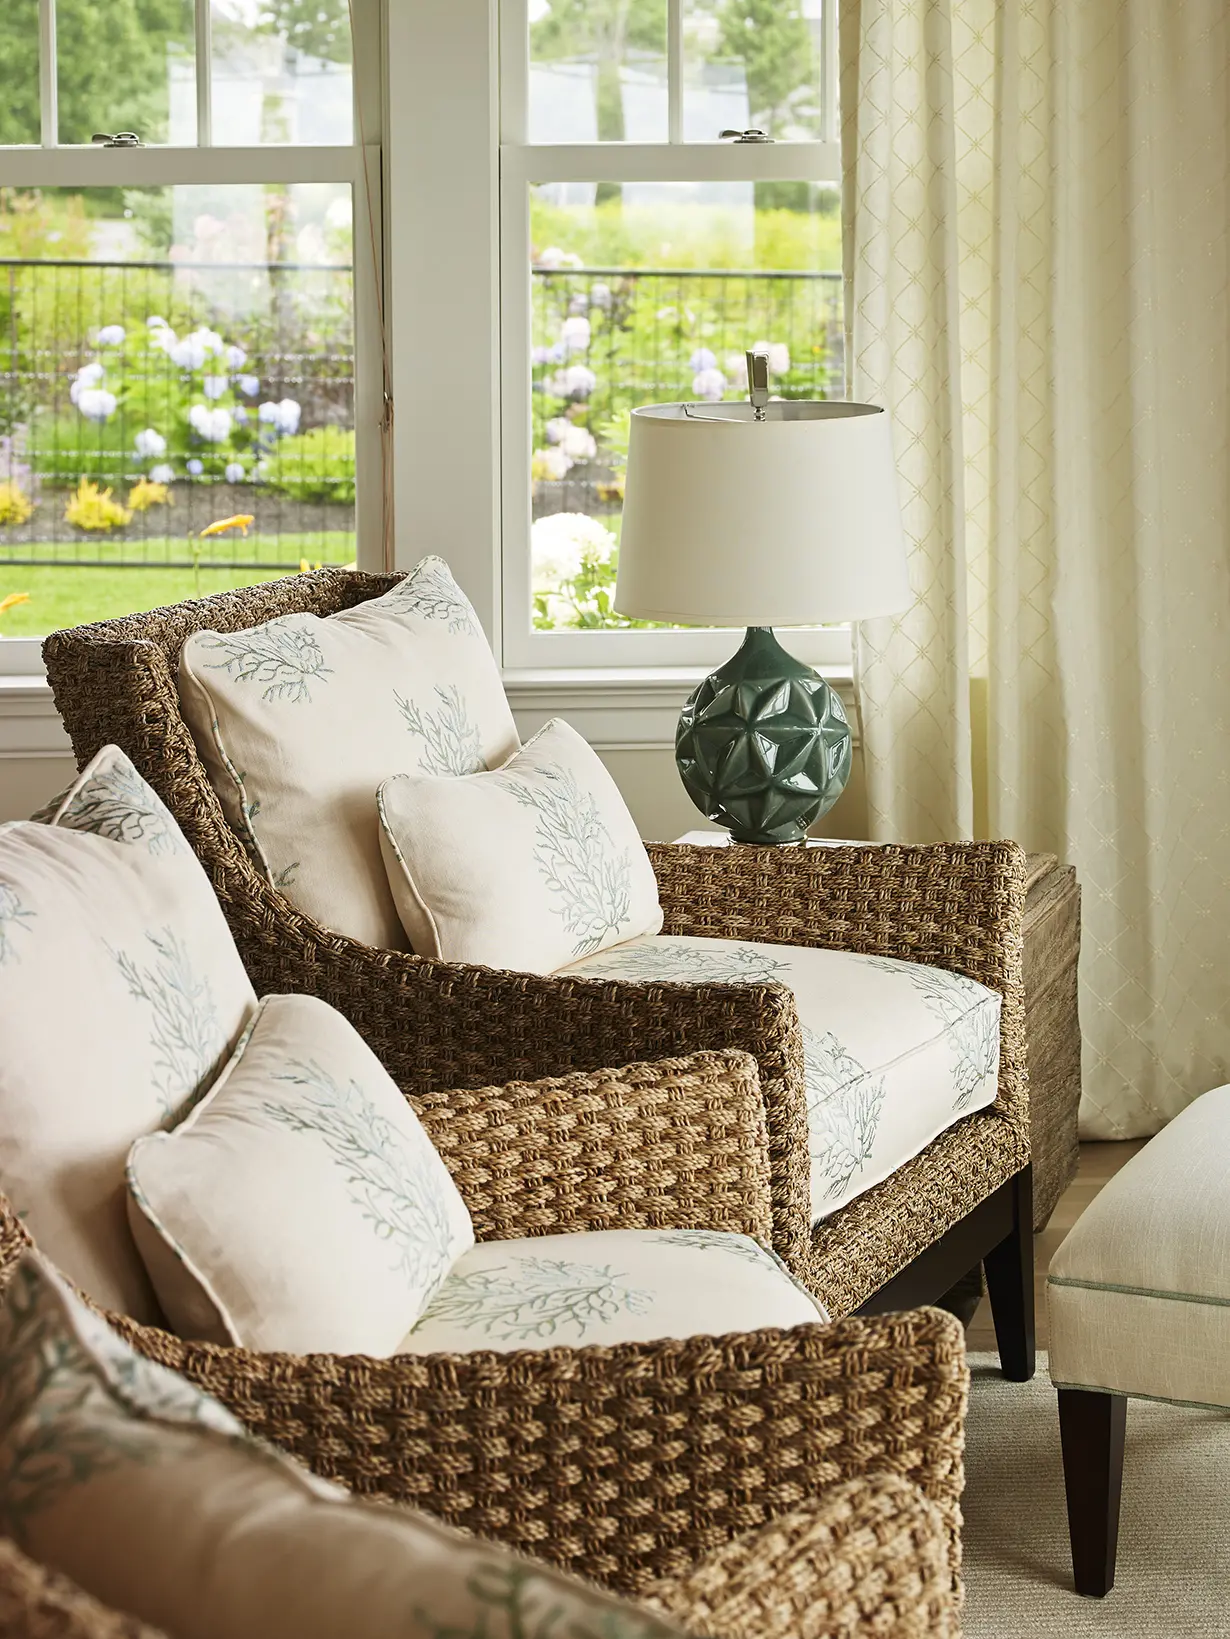 Woven chairs with coral cushions and statement lamp